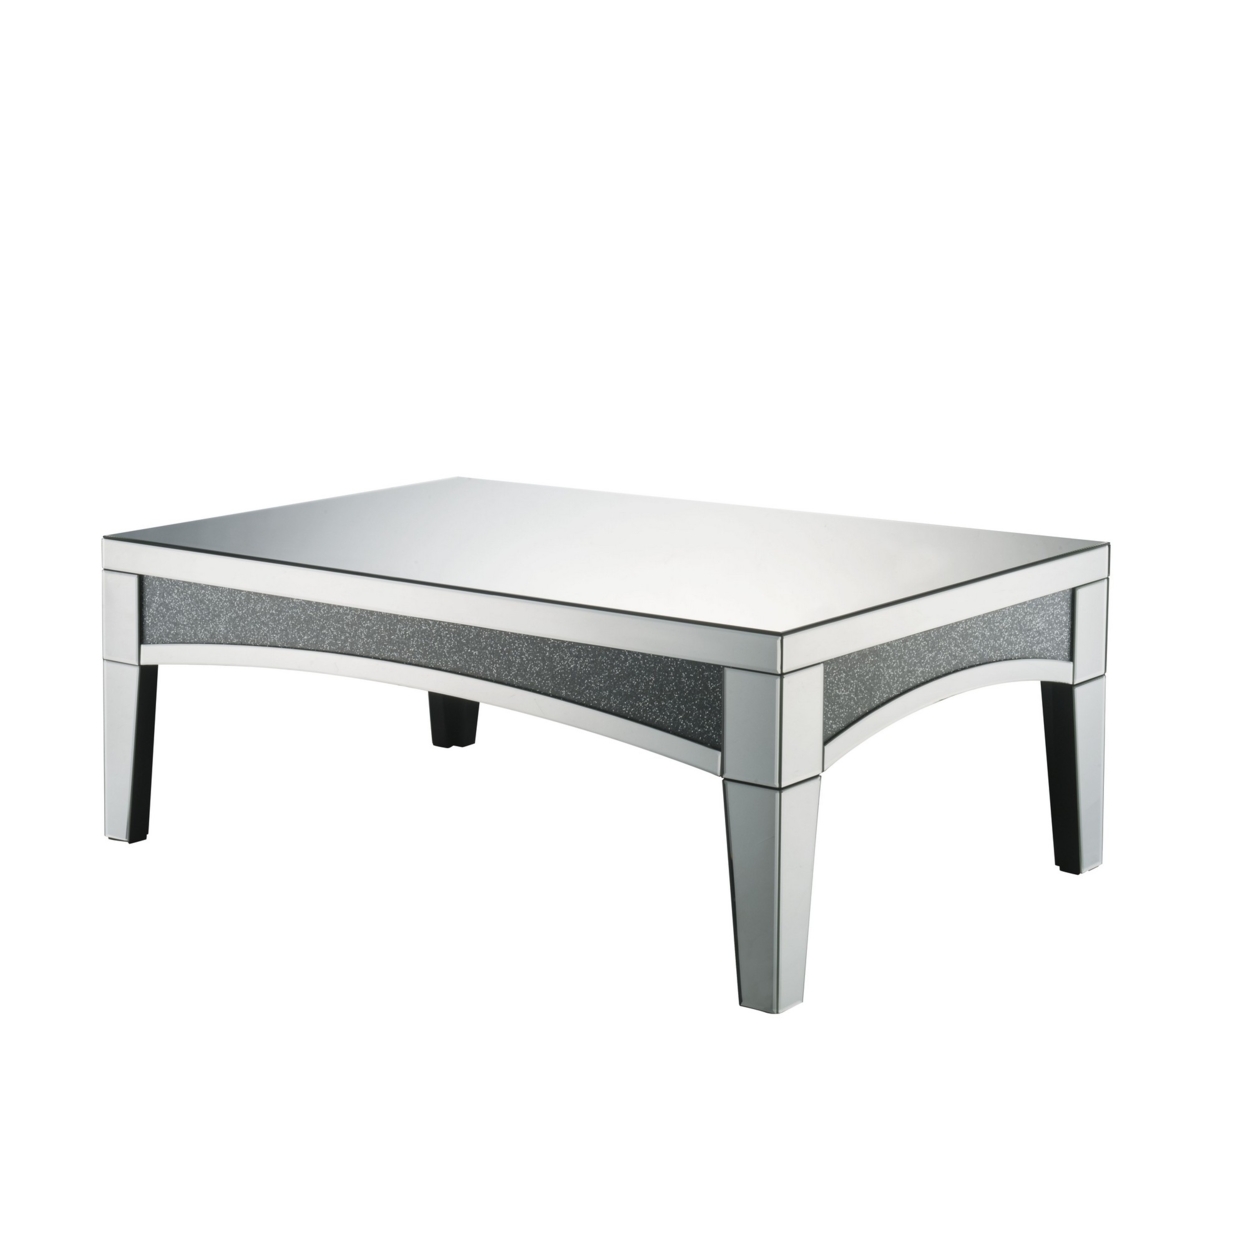 Coffee Table With Mirror Trim And Faux Stone Inlays, Silver- Saltoro Sherpi